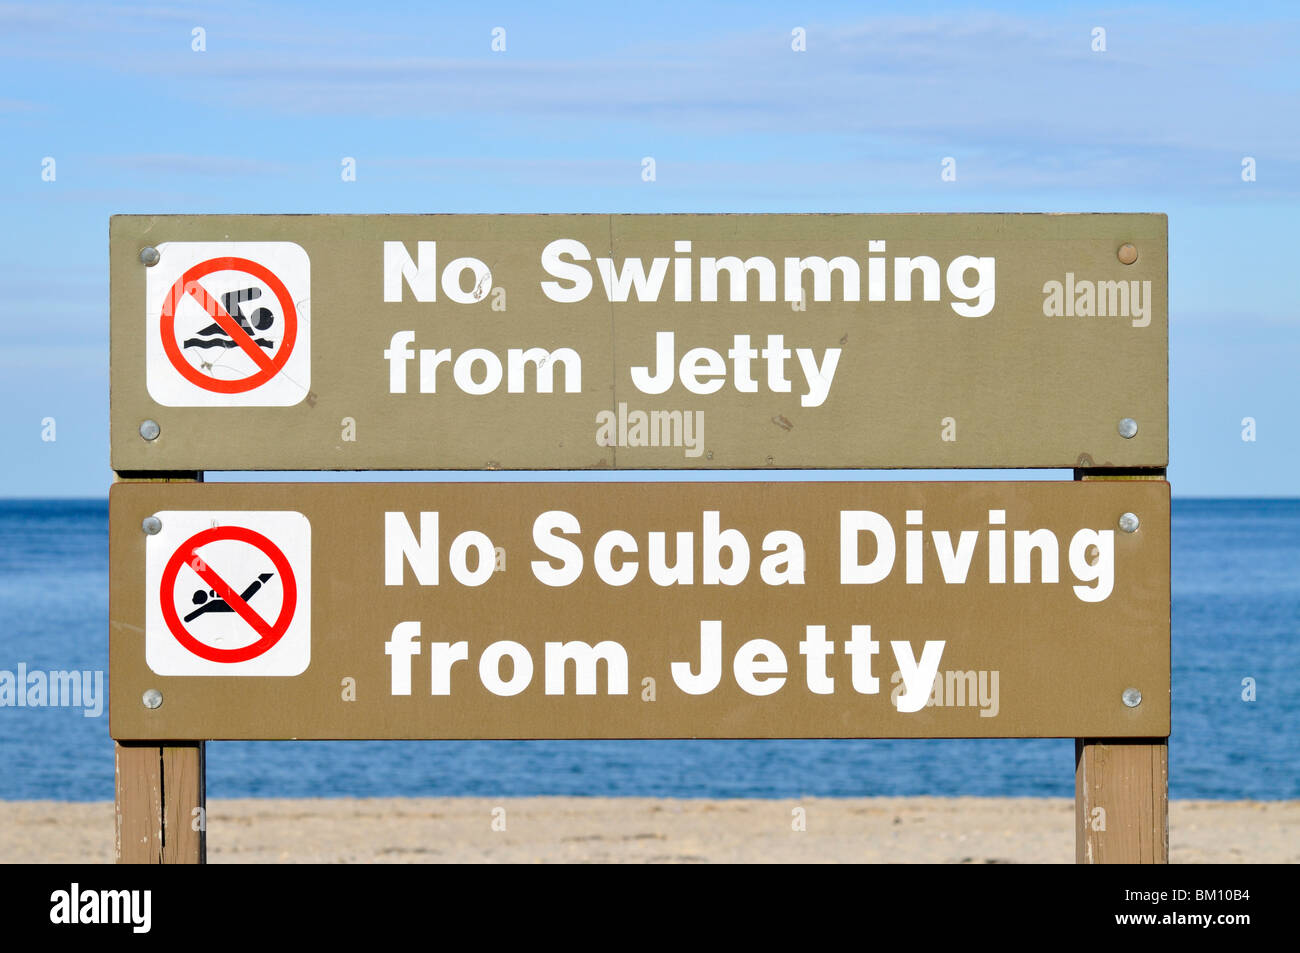 No swimming or scuba diving from jetty signs made of wood at a beach in Sandwich, Cape Cod USA Stock Photo